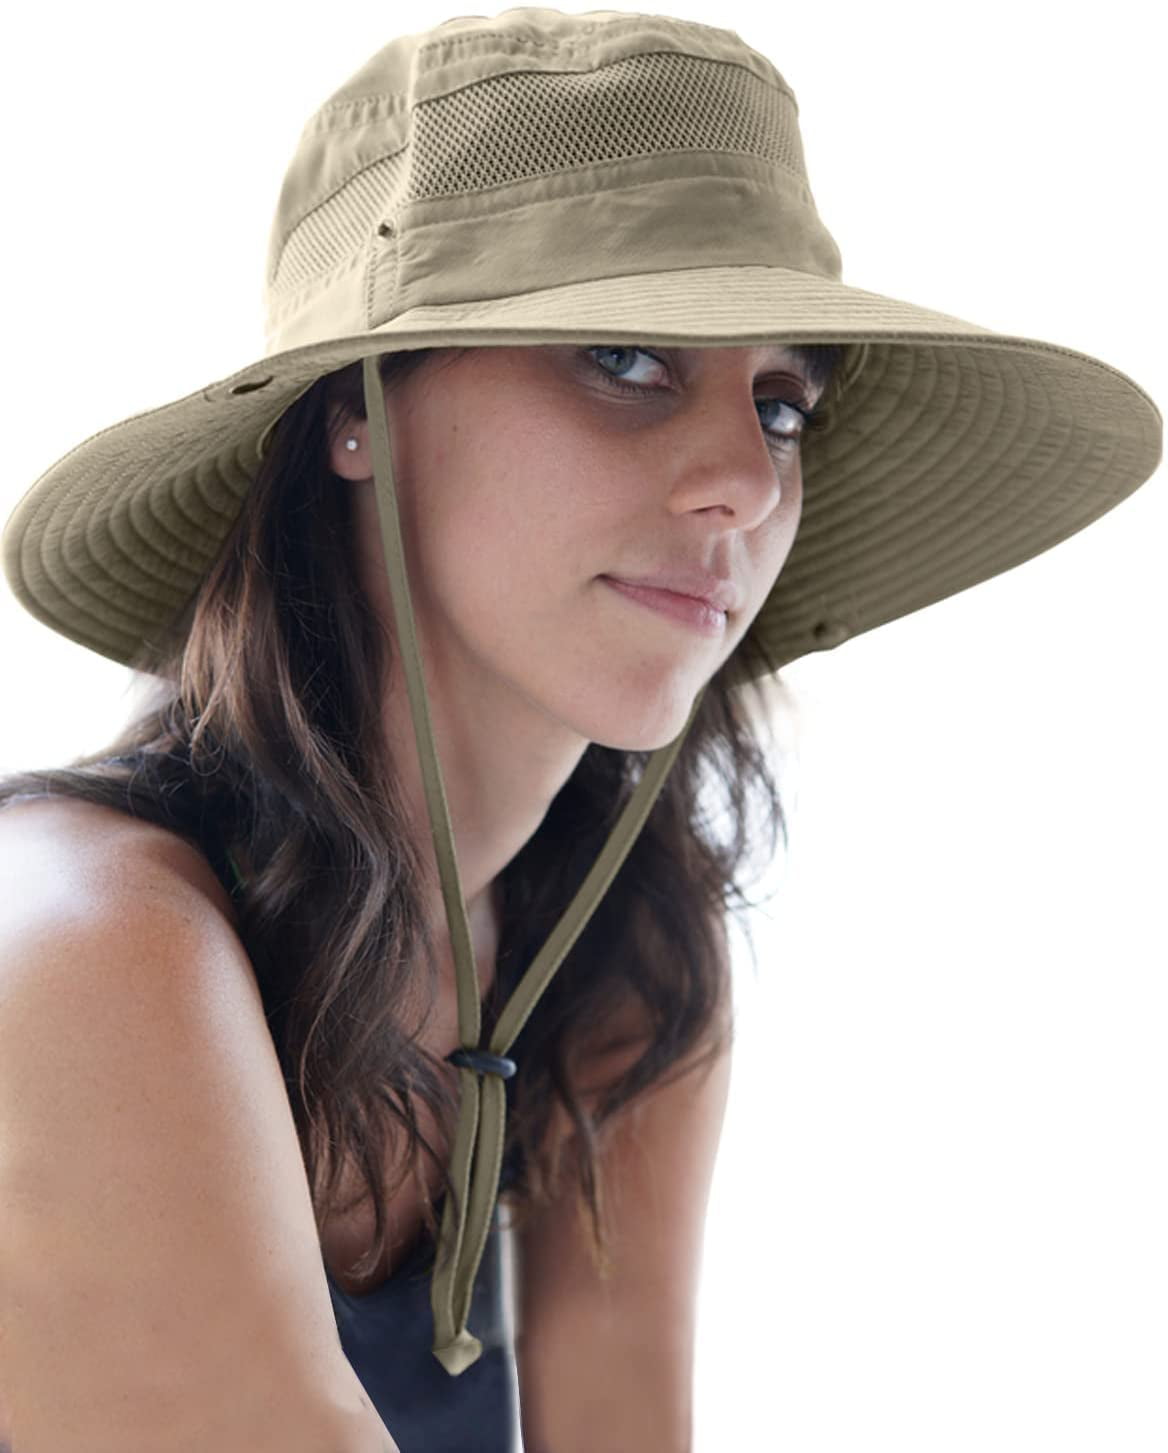 GearTOP Wide Brim Sun Hat for Men and Women - Mens Bucket Hats with UV  Protection for Hiking. Sun Hat Women UPF 50+ (Khaki, 7-7 1/2)